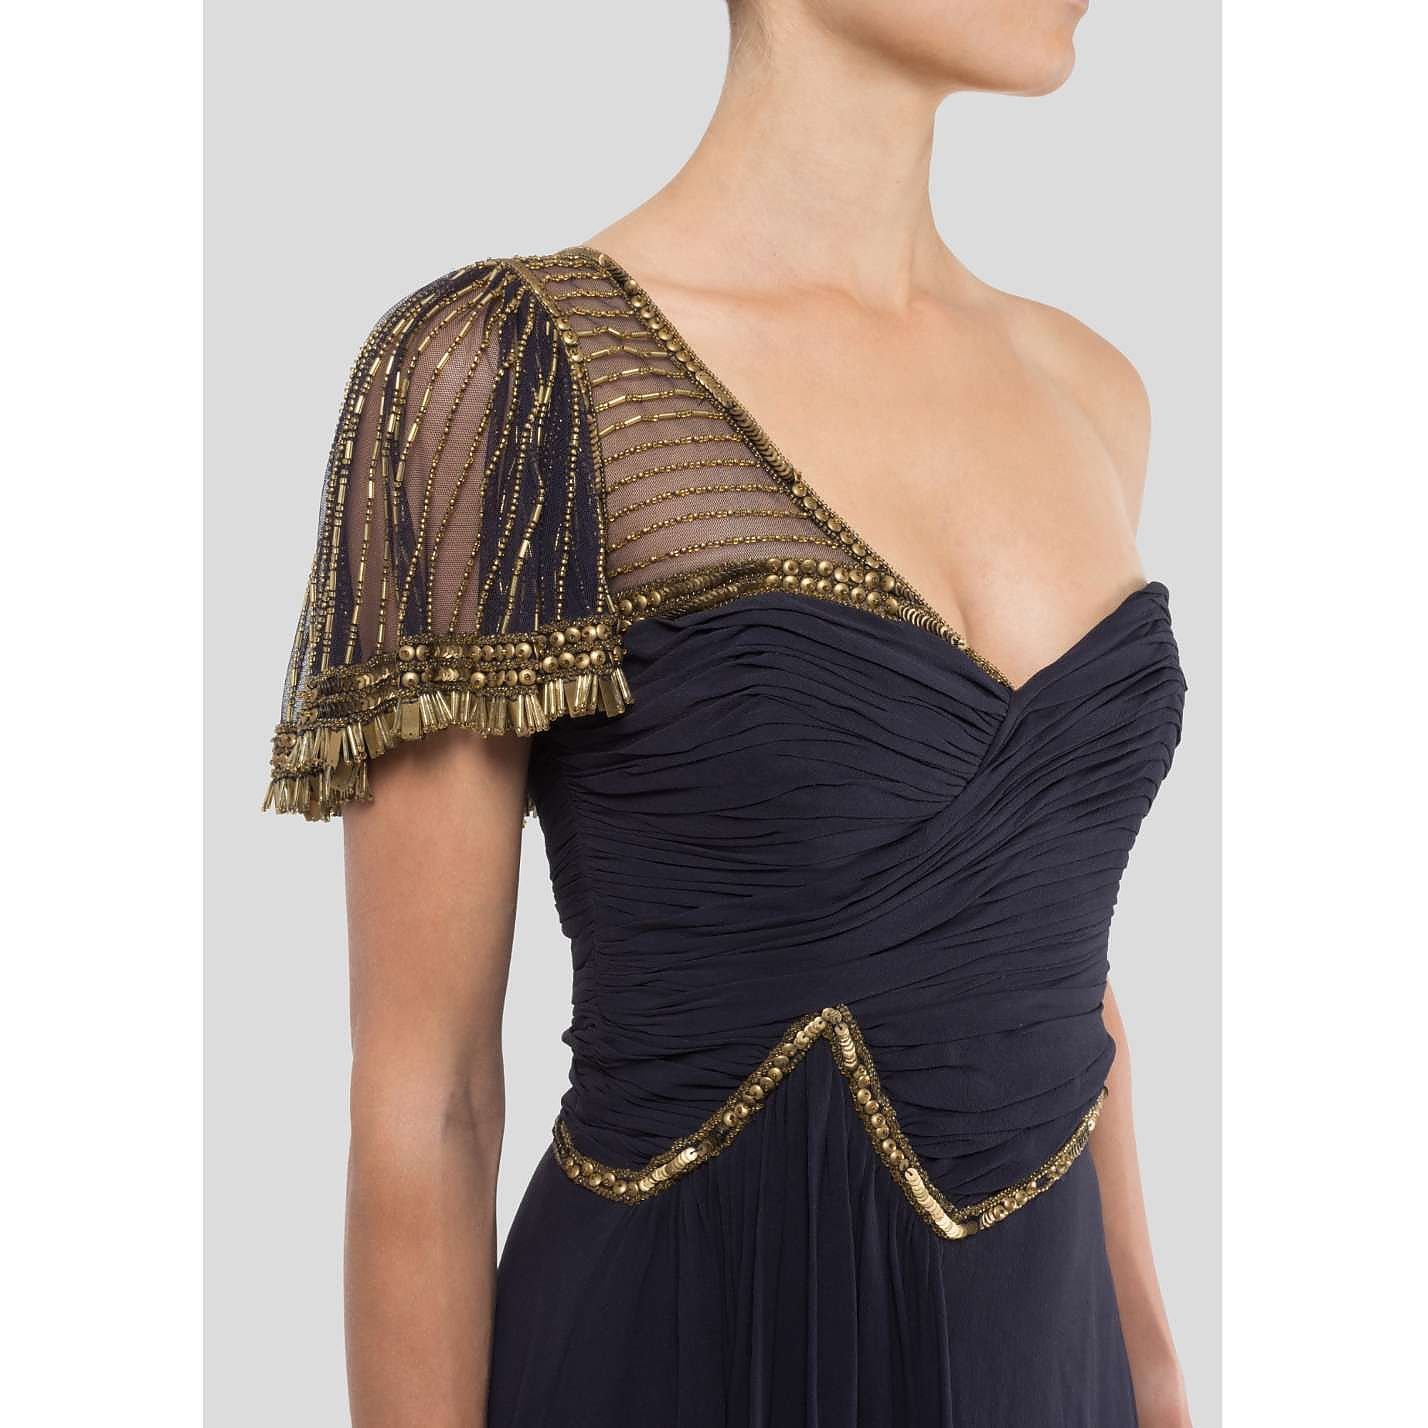 Rent or Buy Temperley London One Shoulder Mini Dress from MyWardrobeHQ.com